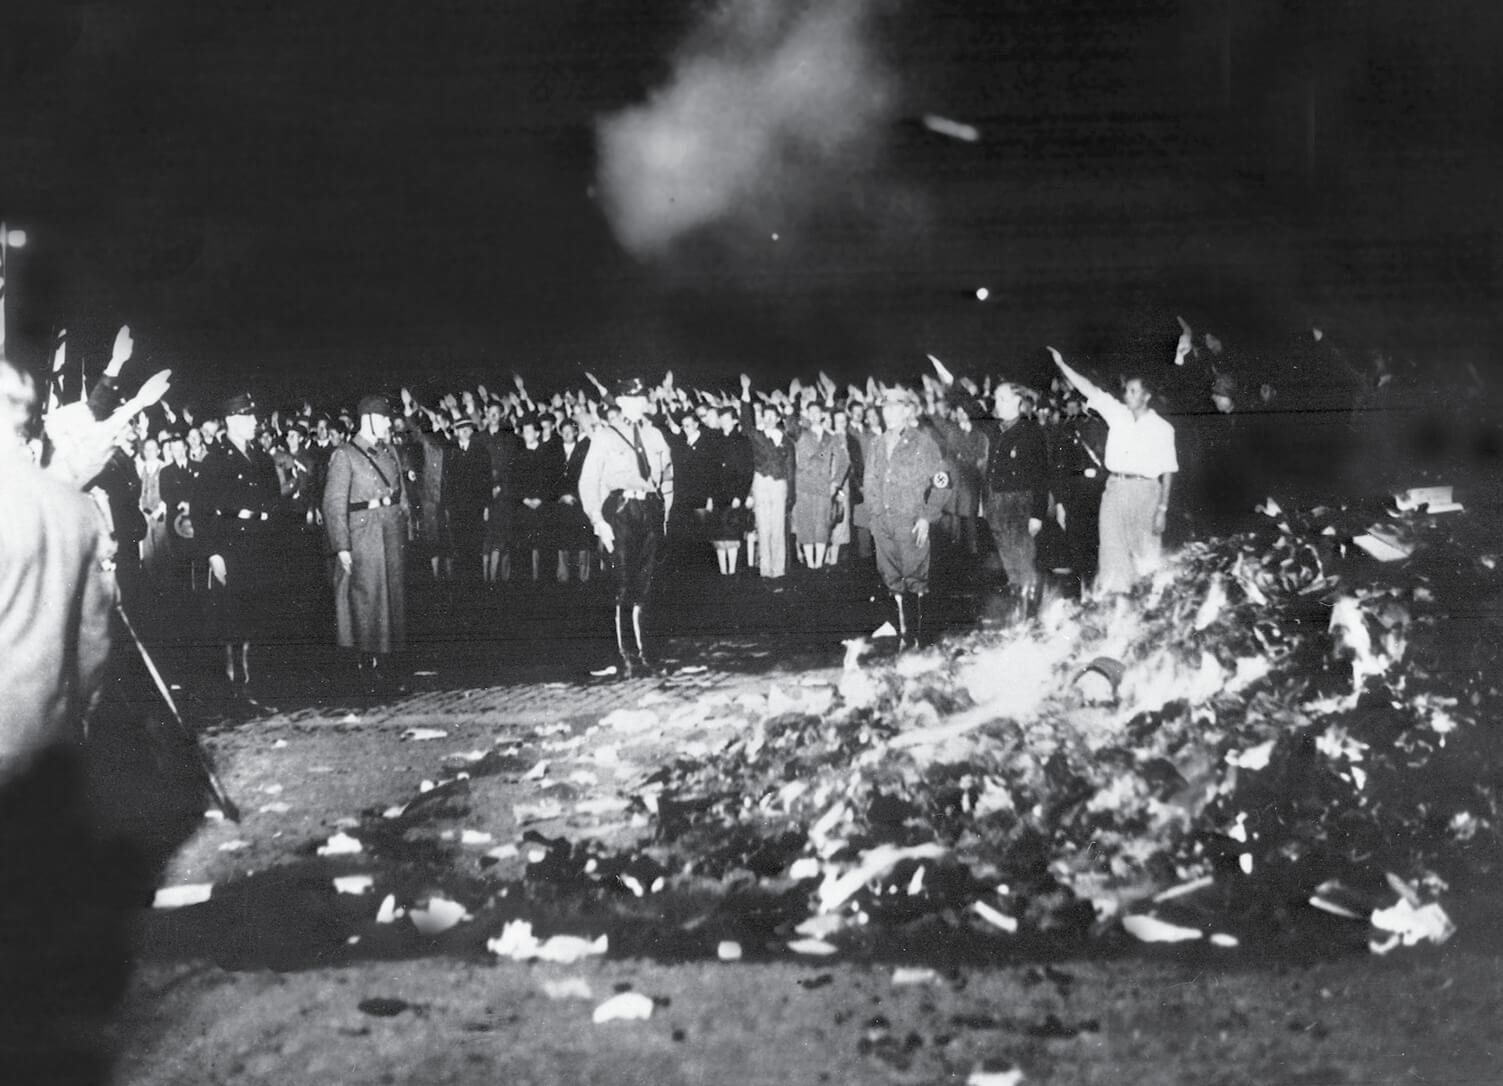 Verbrennung in Berlin. The 10 May 1933 book burning organized by the Nazis at the city’s Opernplatz, now Bebelplatz.